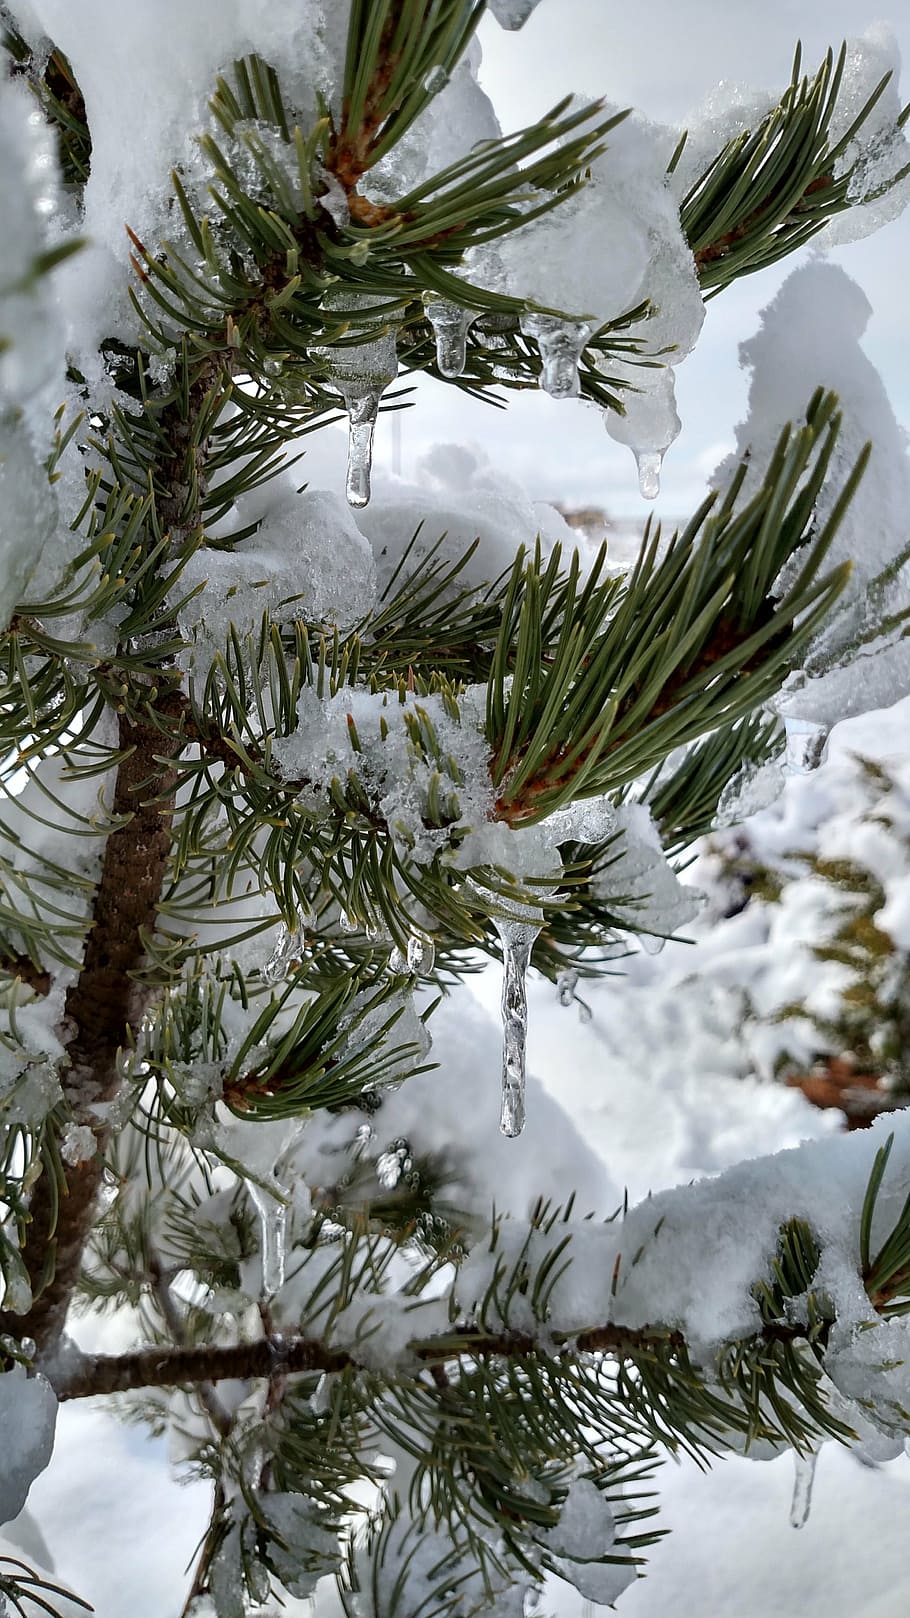 pinus edulis, pin, evergreen, tree, snow, winter, icicles, cold temperature, plant, christmas